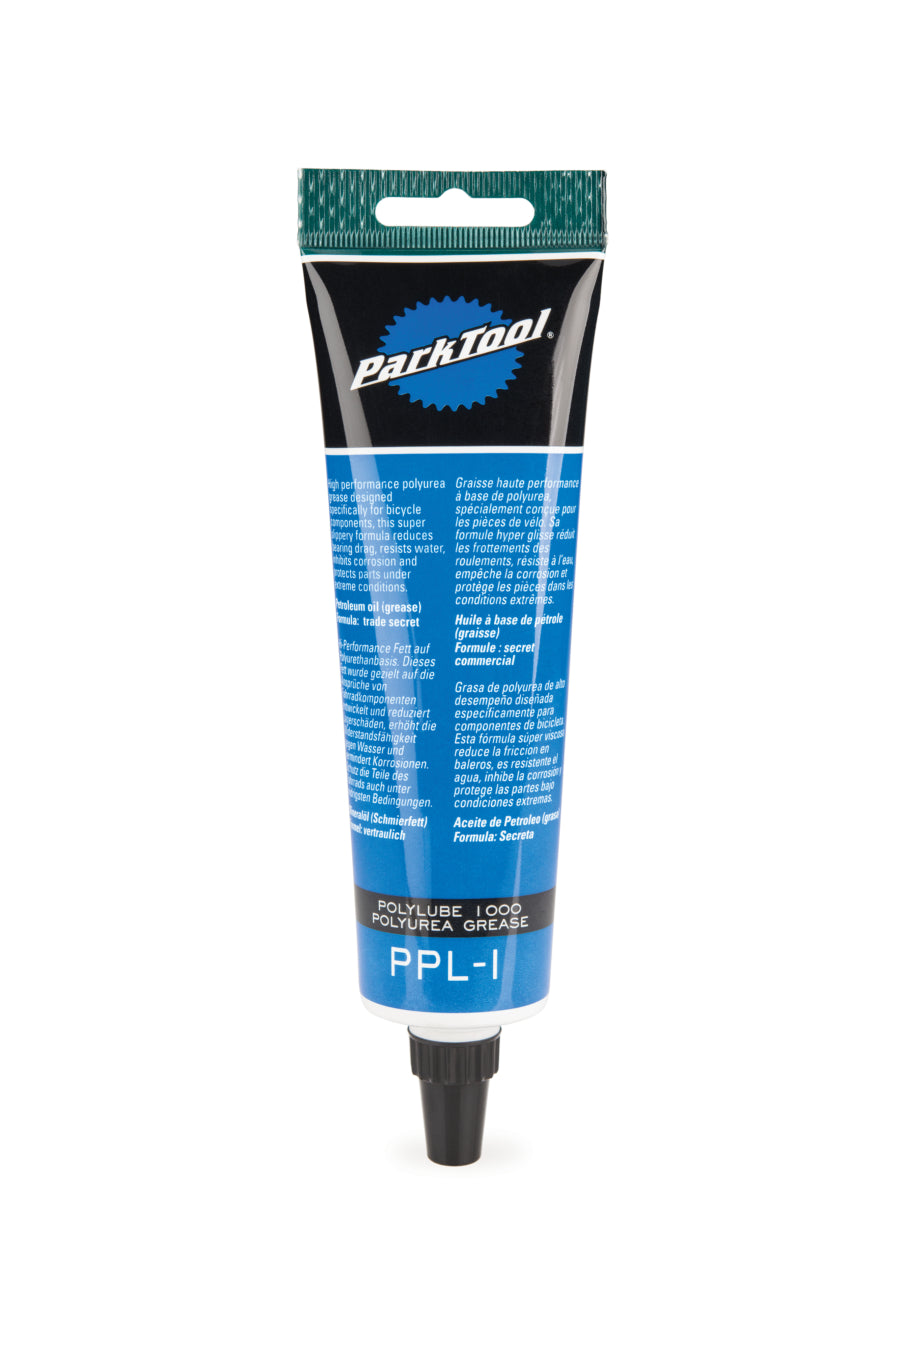 Park Tool PPL-1 Poly Lube Grease